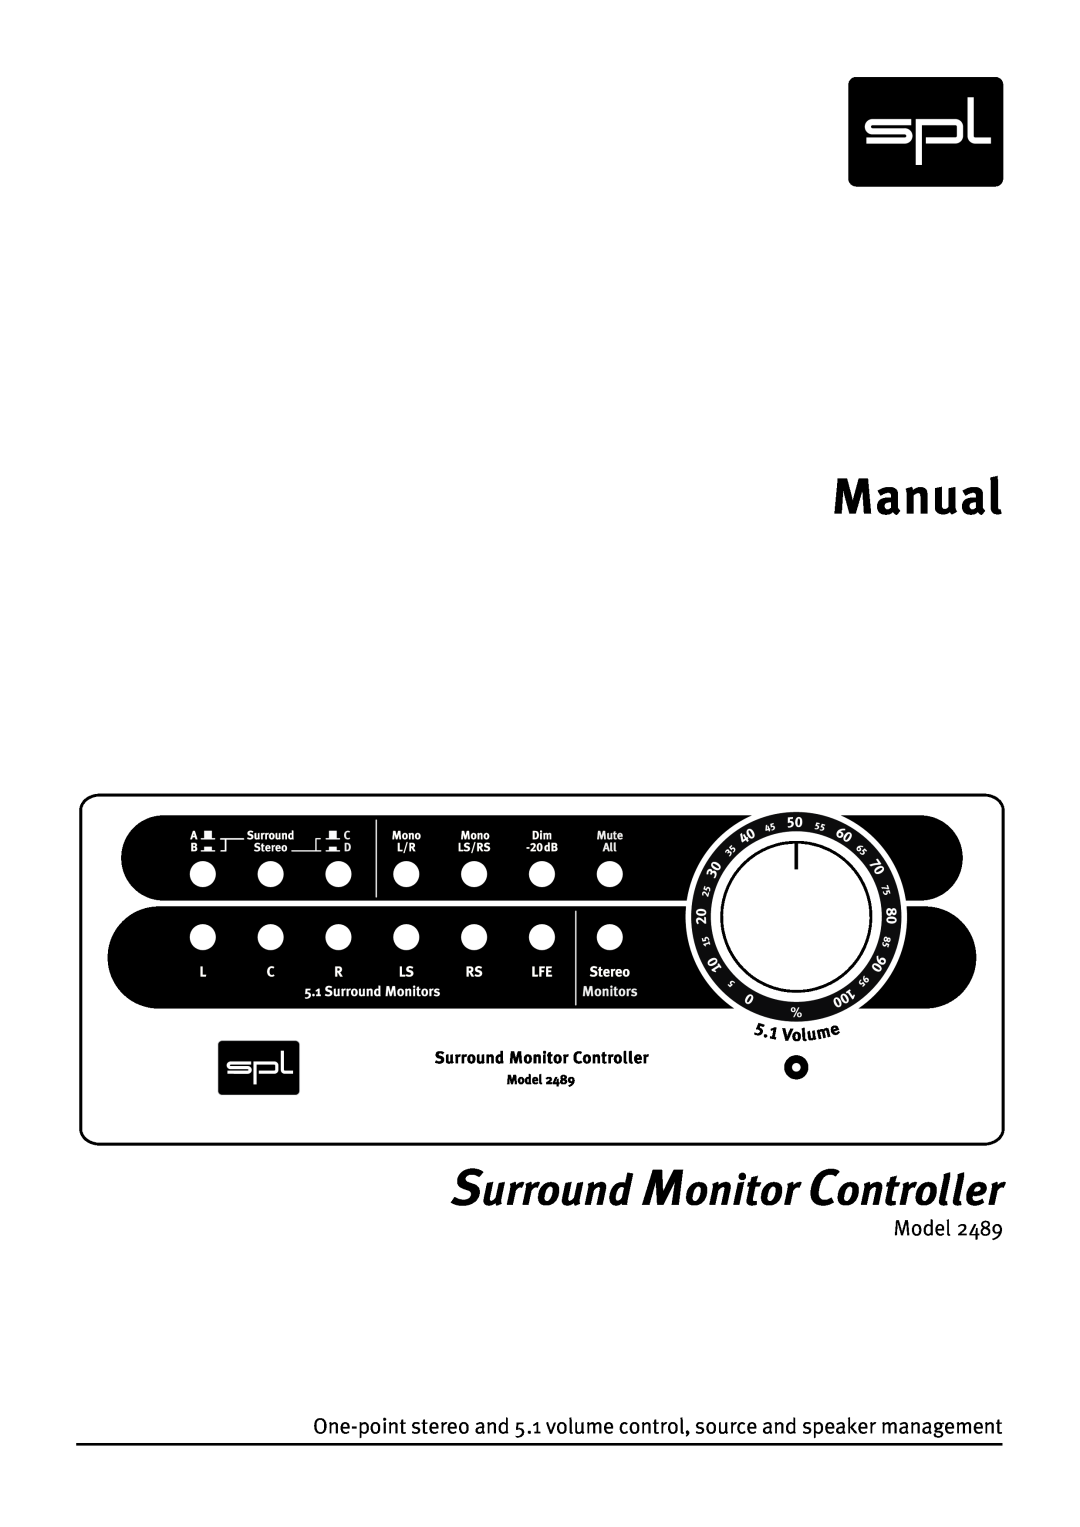 Sound Performance Lab 2489 manual Manual, Surround Monitor Controller, Model 